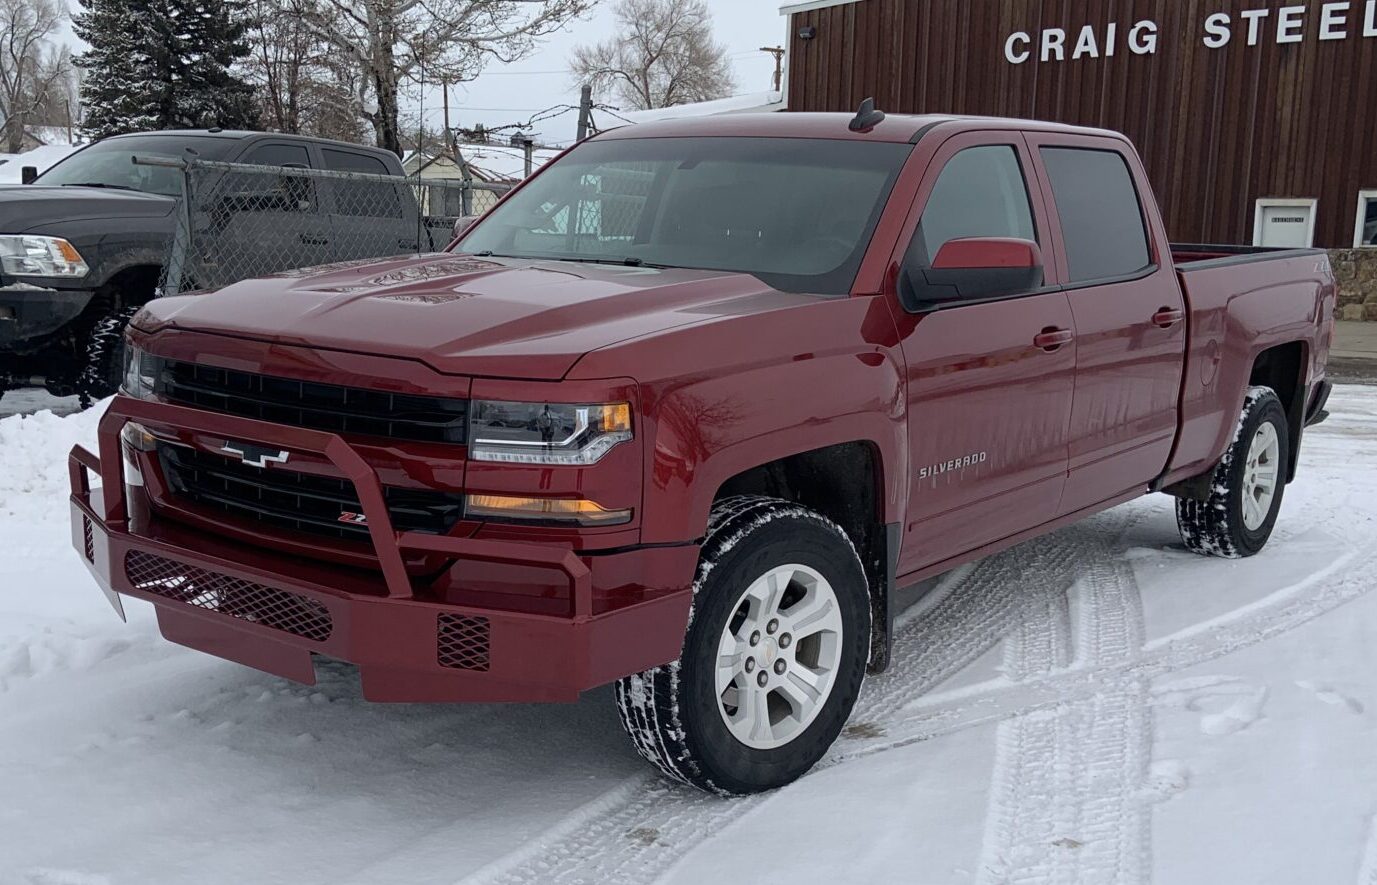 Custom bumper on Chevy in red